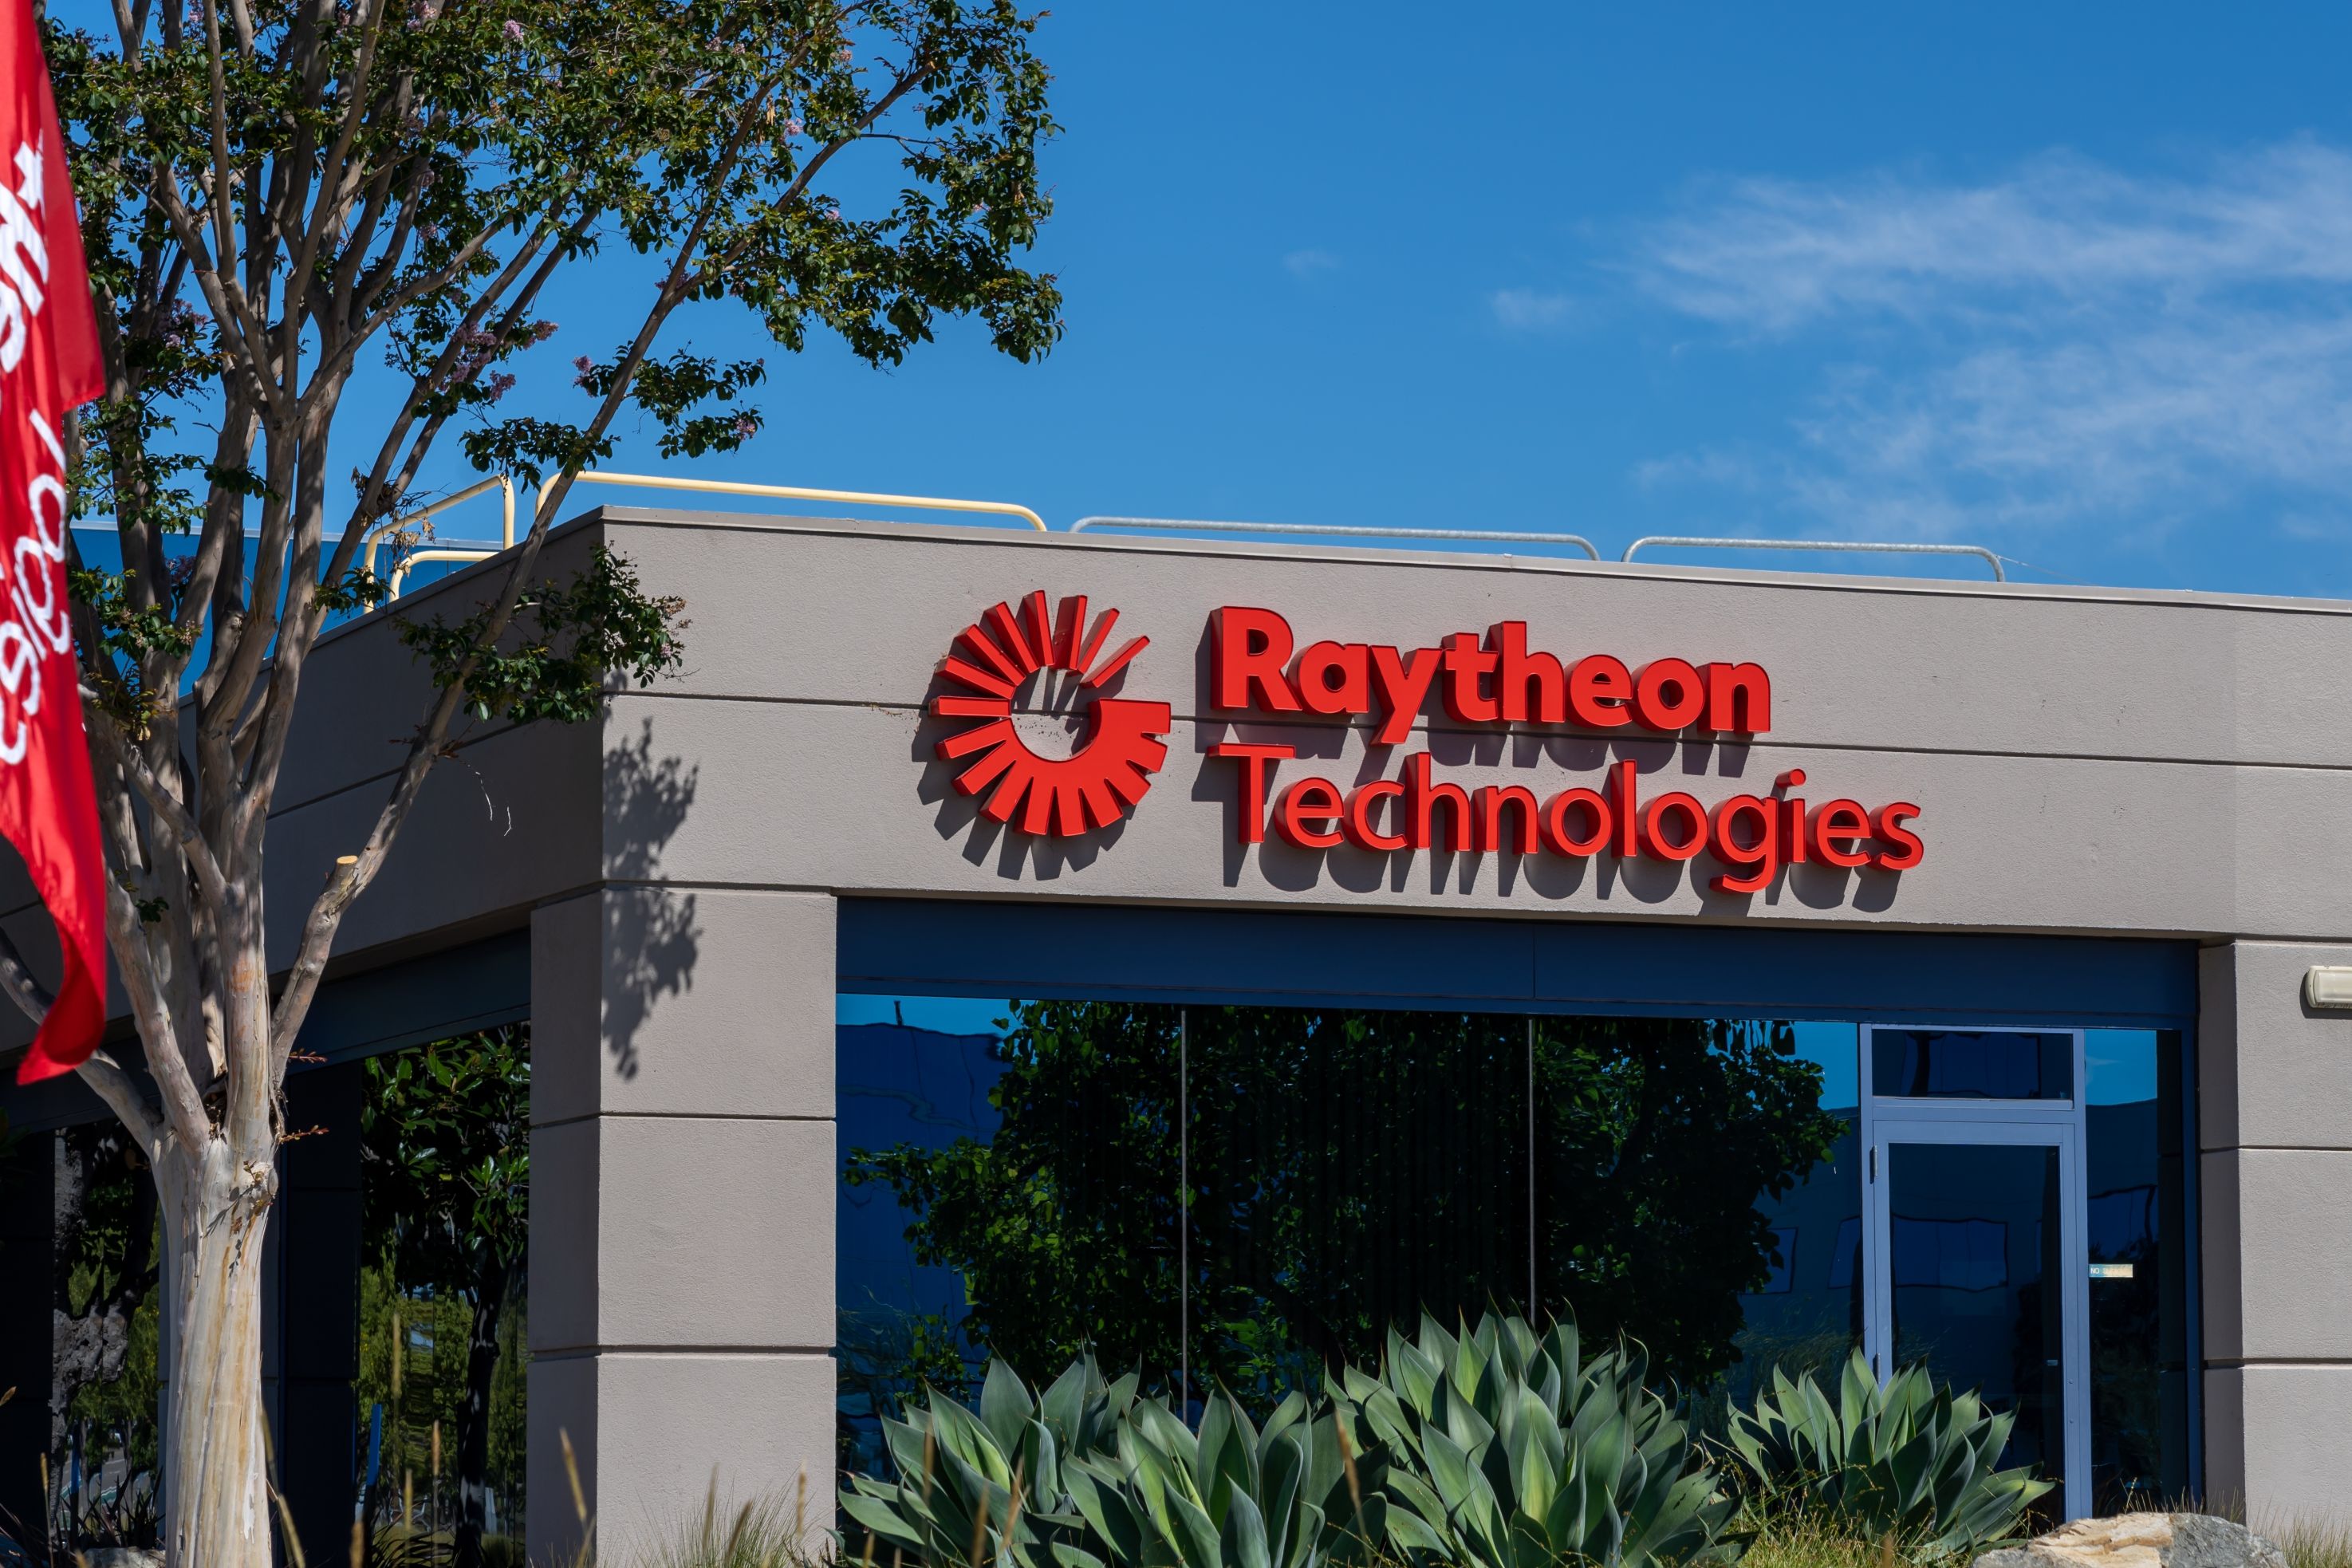 San Diego, CA, USA - July 9, 2022: Close up of Raytheon Technologies sign on the building. Raytheon Technologies Corporation is an American aerospace and defense conglomerate.